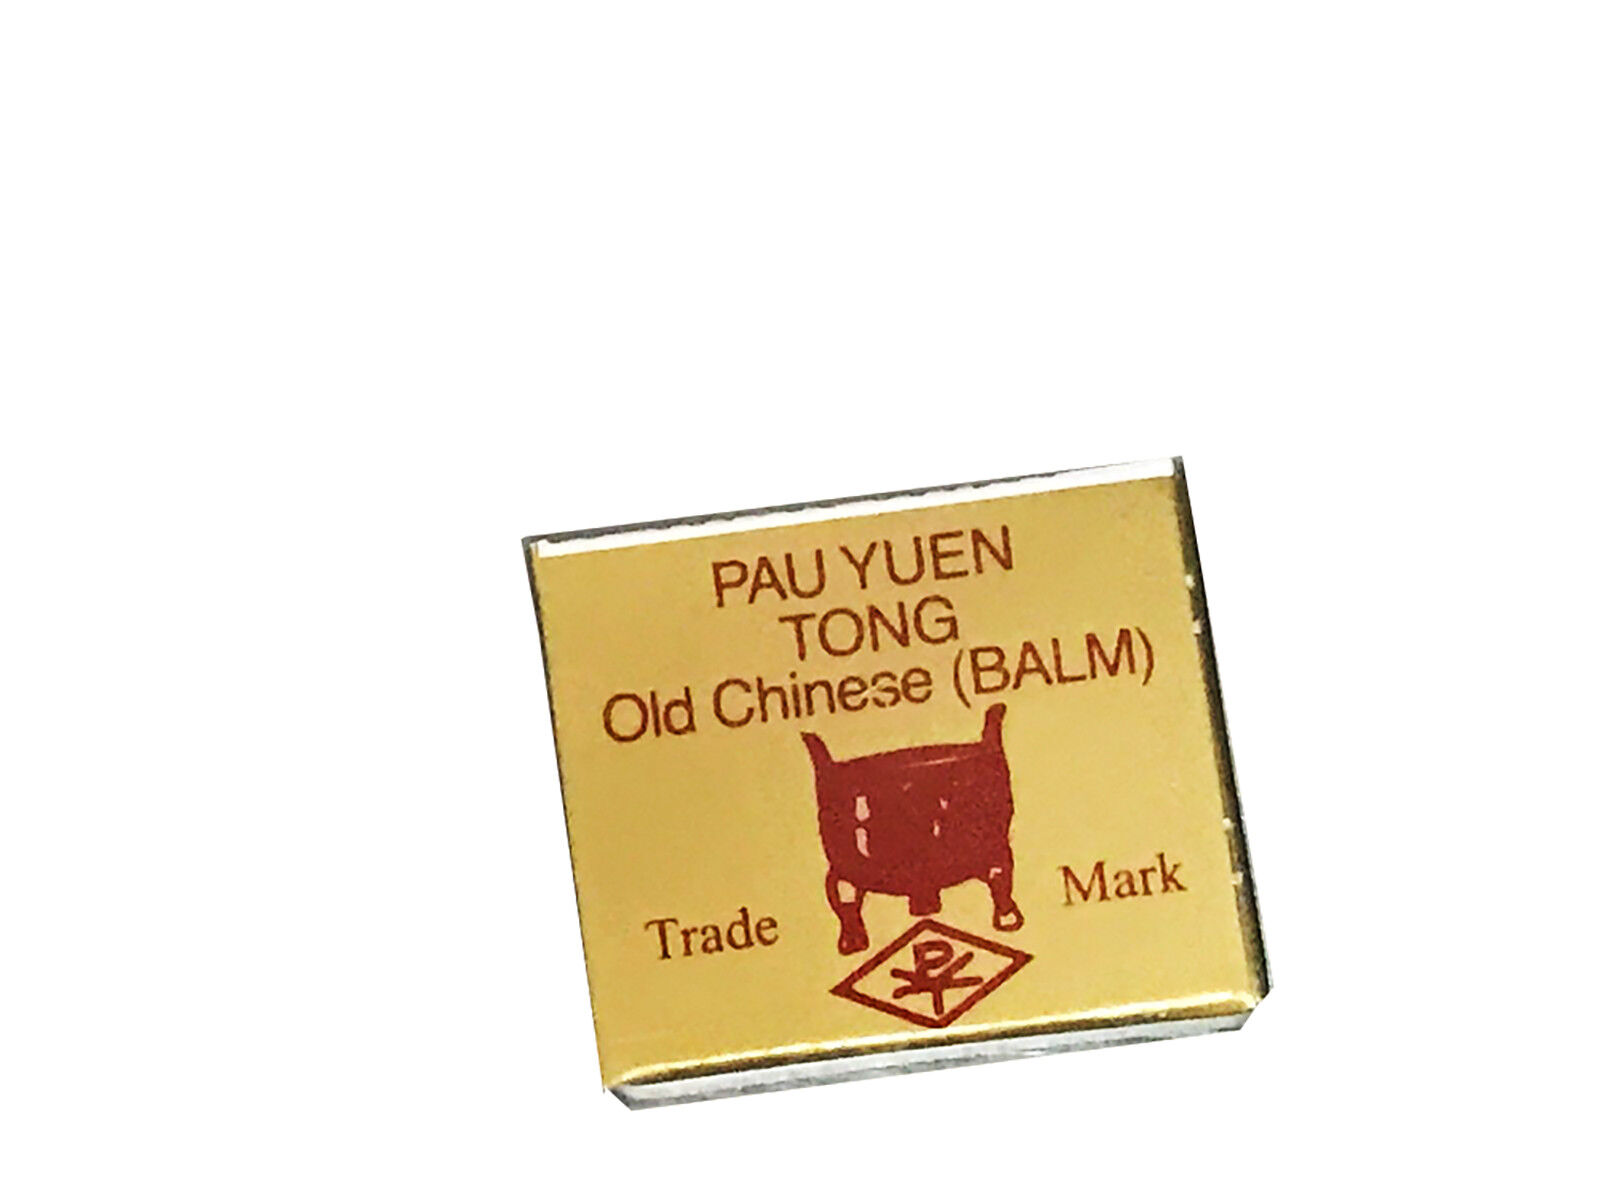 Pau Yuen Tong Old Chinese Balm Delay Plus Control, Authentic, 